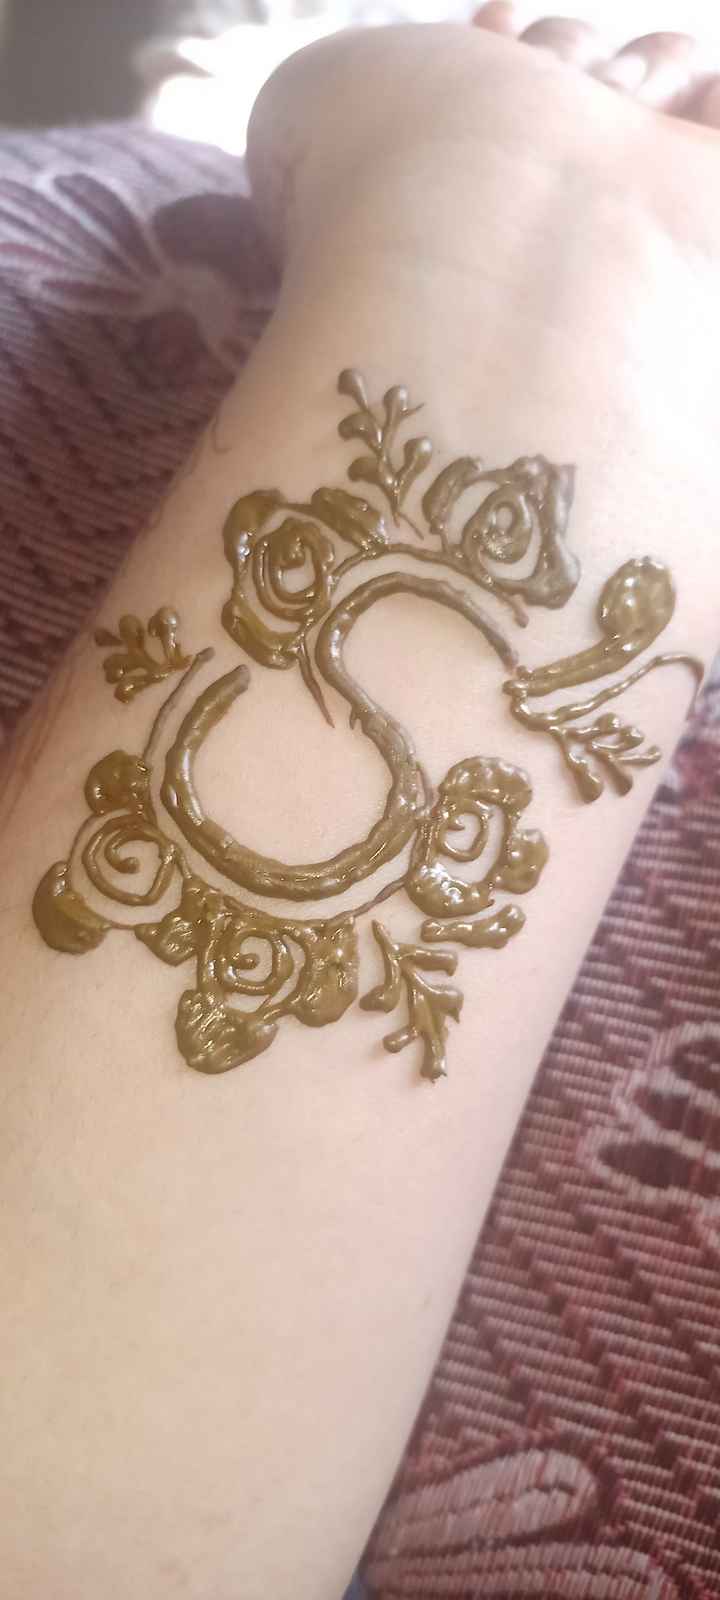 Share 70+ a letter mehndi design tattoo - in.cdgdbentre